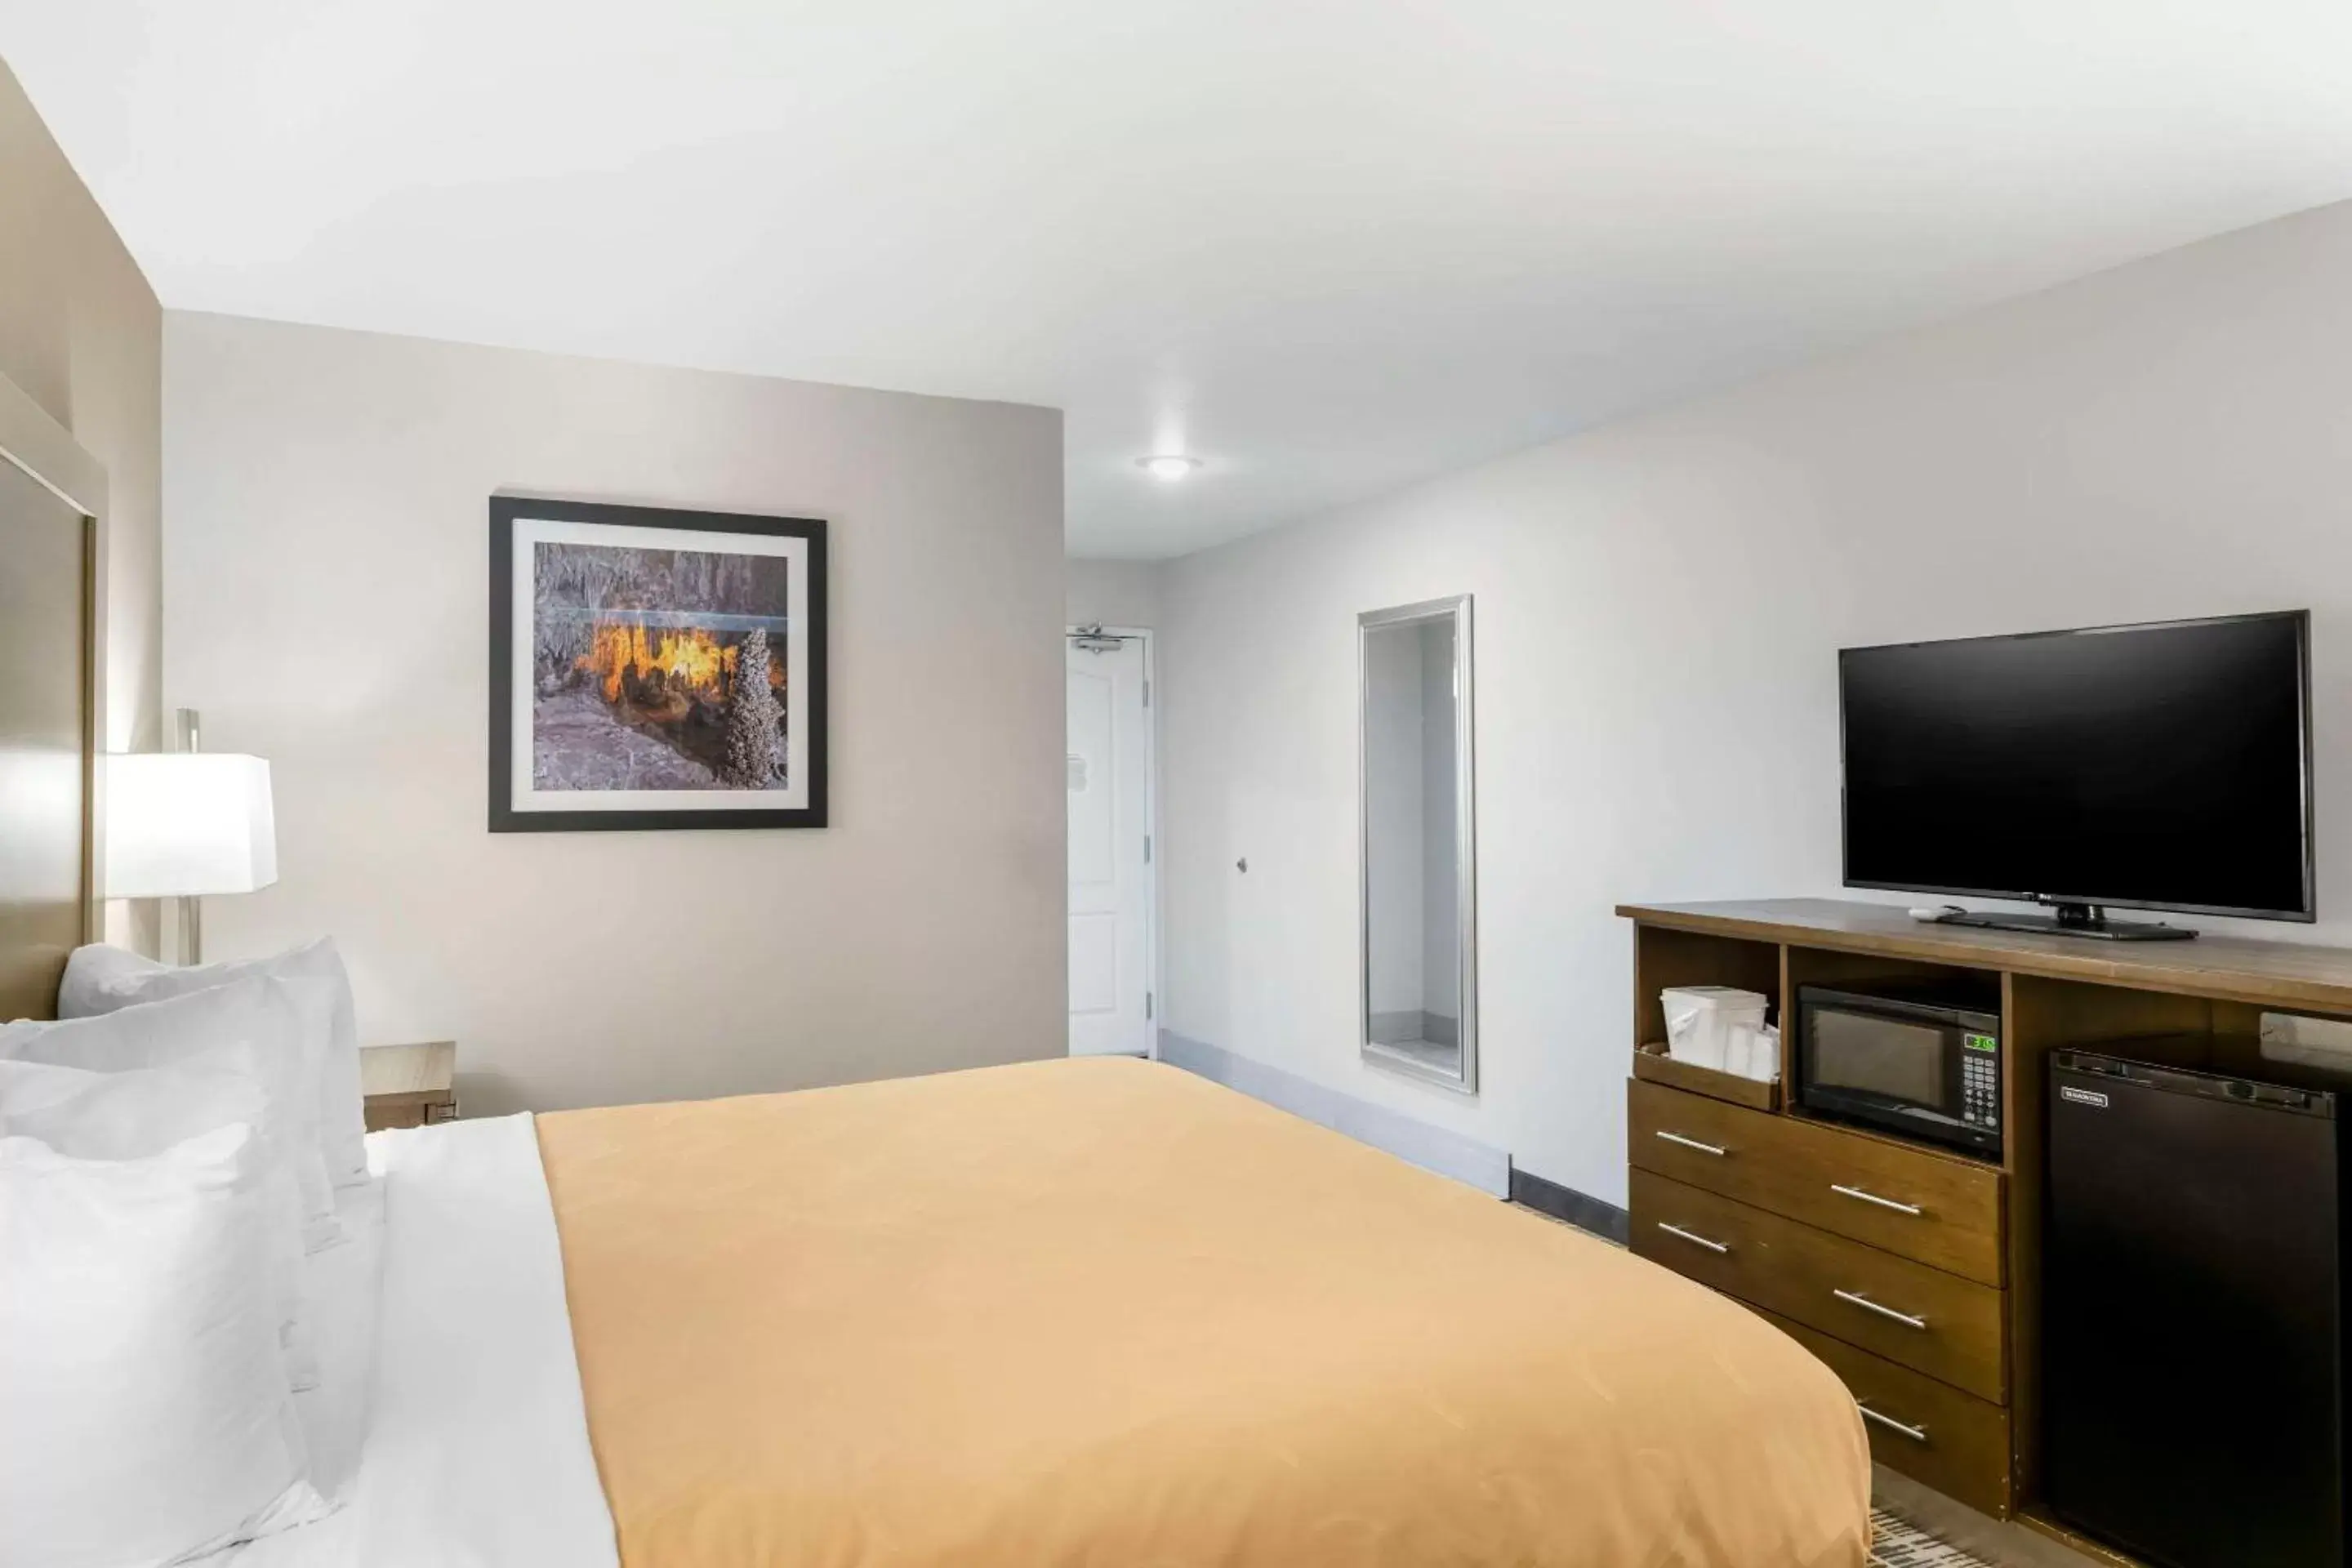 Bedroom, Bed in Quality Inn & Suites Carlsbad Caverns Area